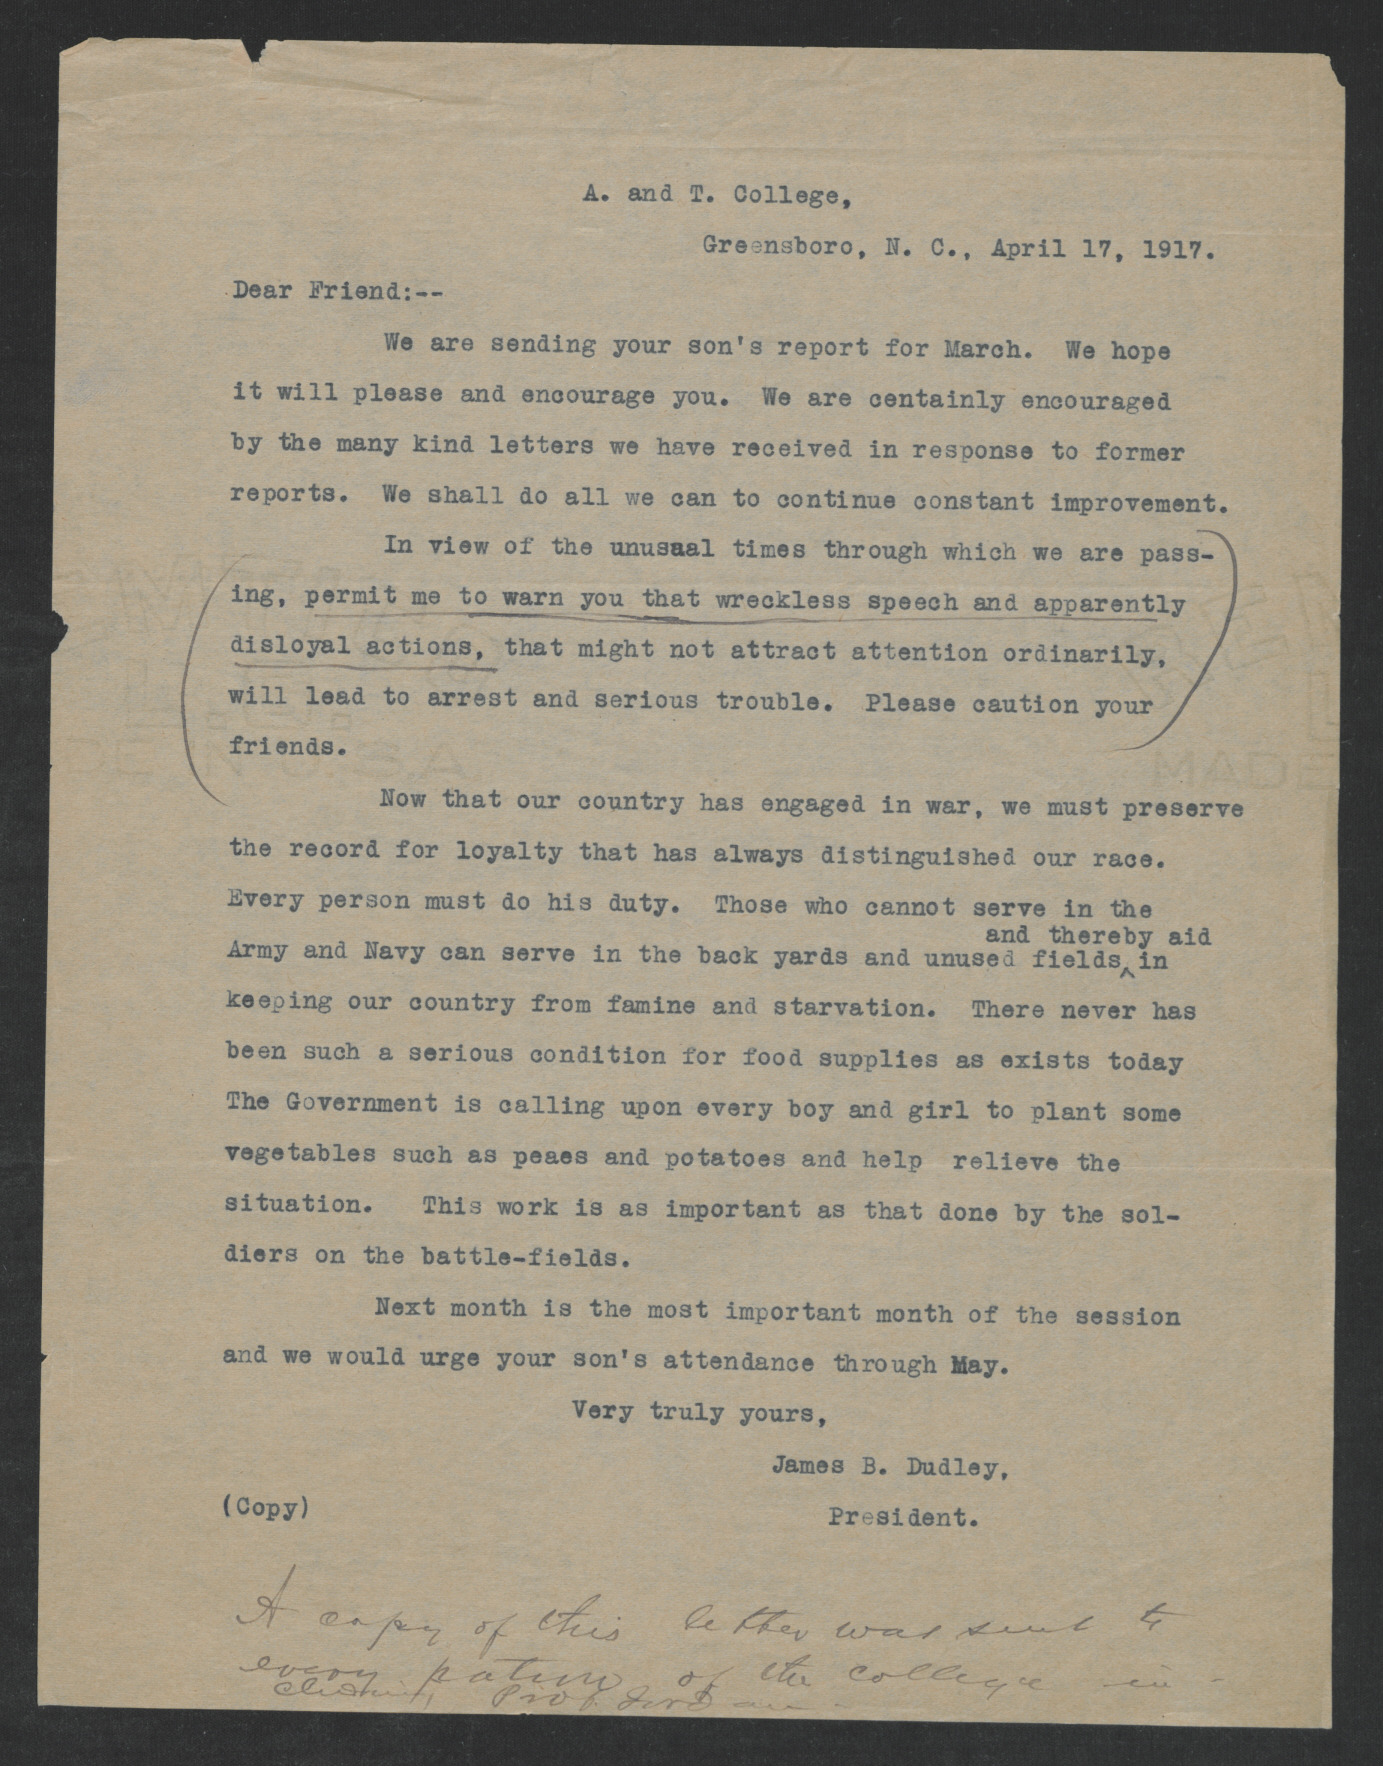 Letter from James B. Dudley to Dear Friend, April 17, 1917